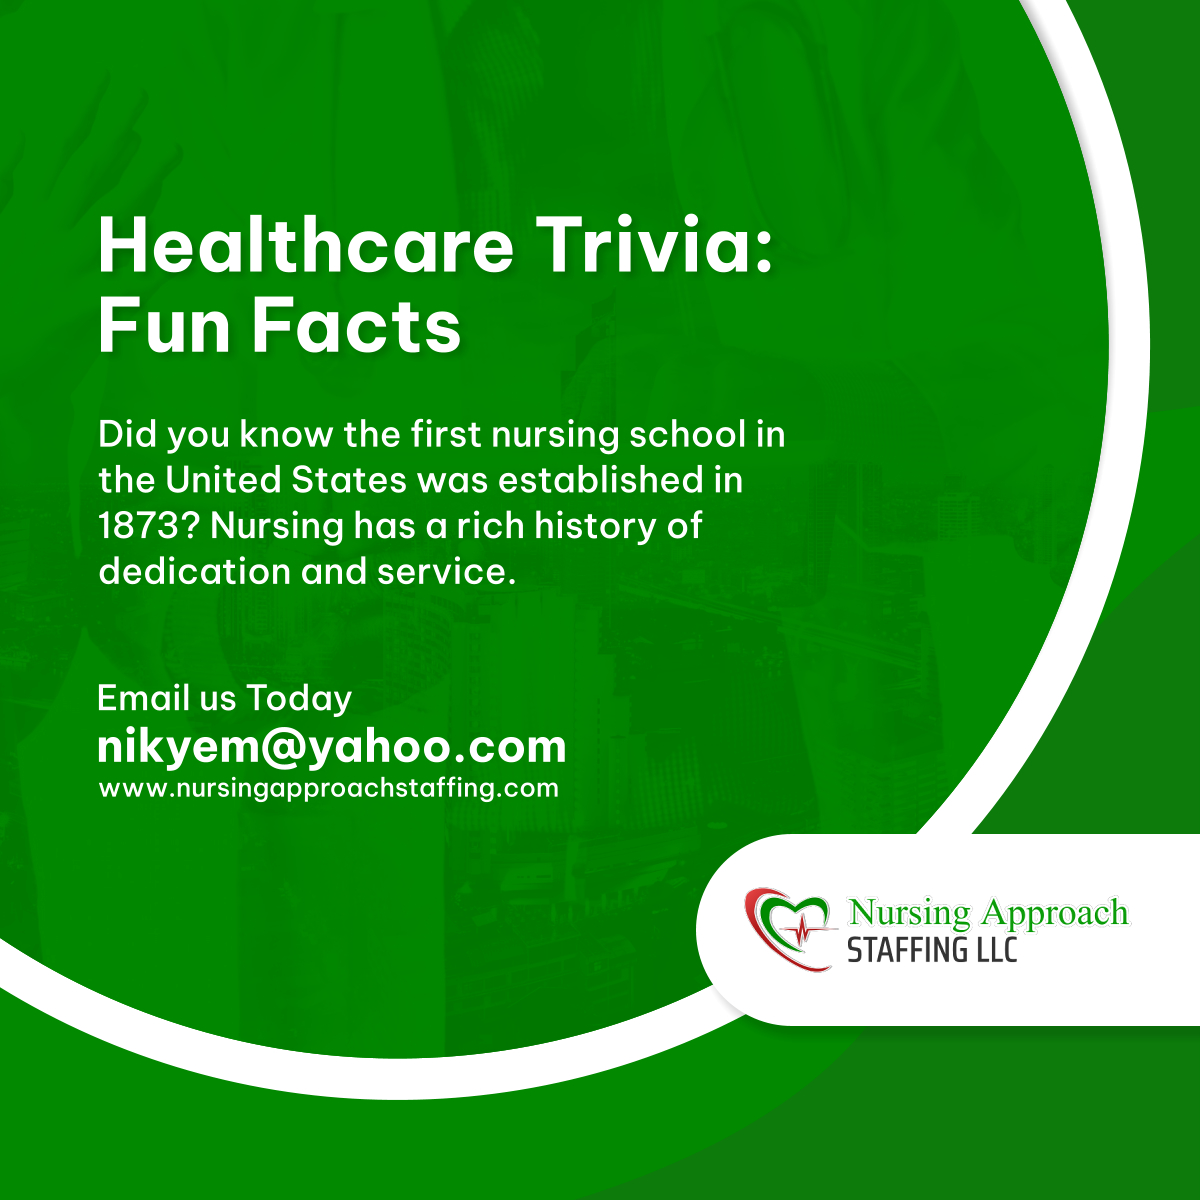 Dive into healthcare history with our fun facts! Learn something new about the fascinating world of nursing. 

#PhiladelphiaPA #HealthcareStaffing #HealthcareTrivia